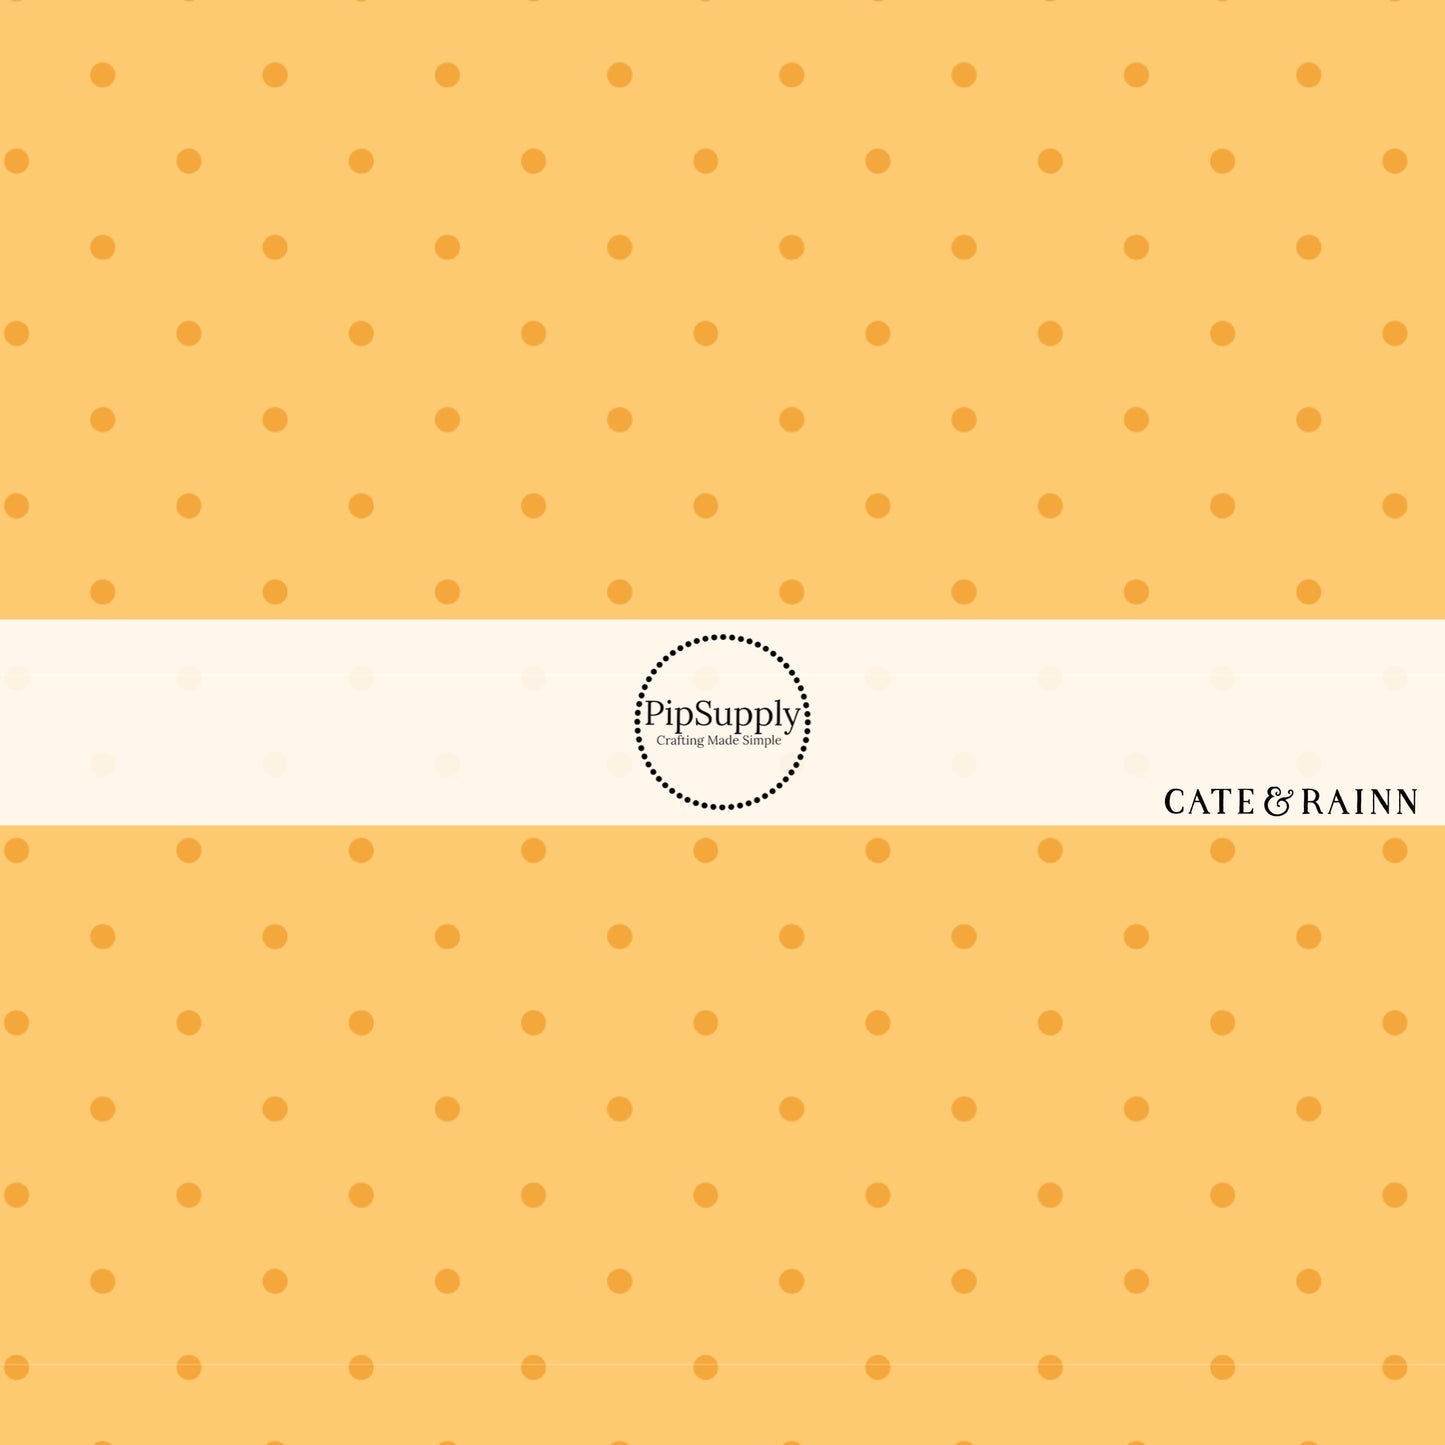 These dot themed marigold fabric by the yard features dark orange dots on light orange. This fun summer dot themed fabric can be used for all your sewing and crafting needs! 